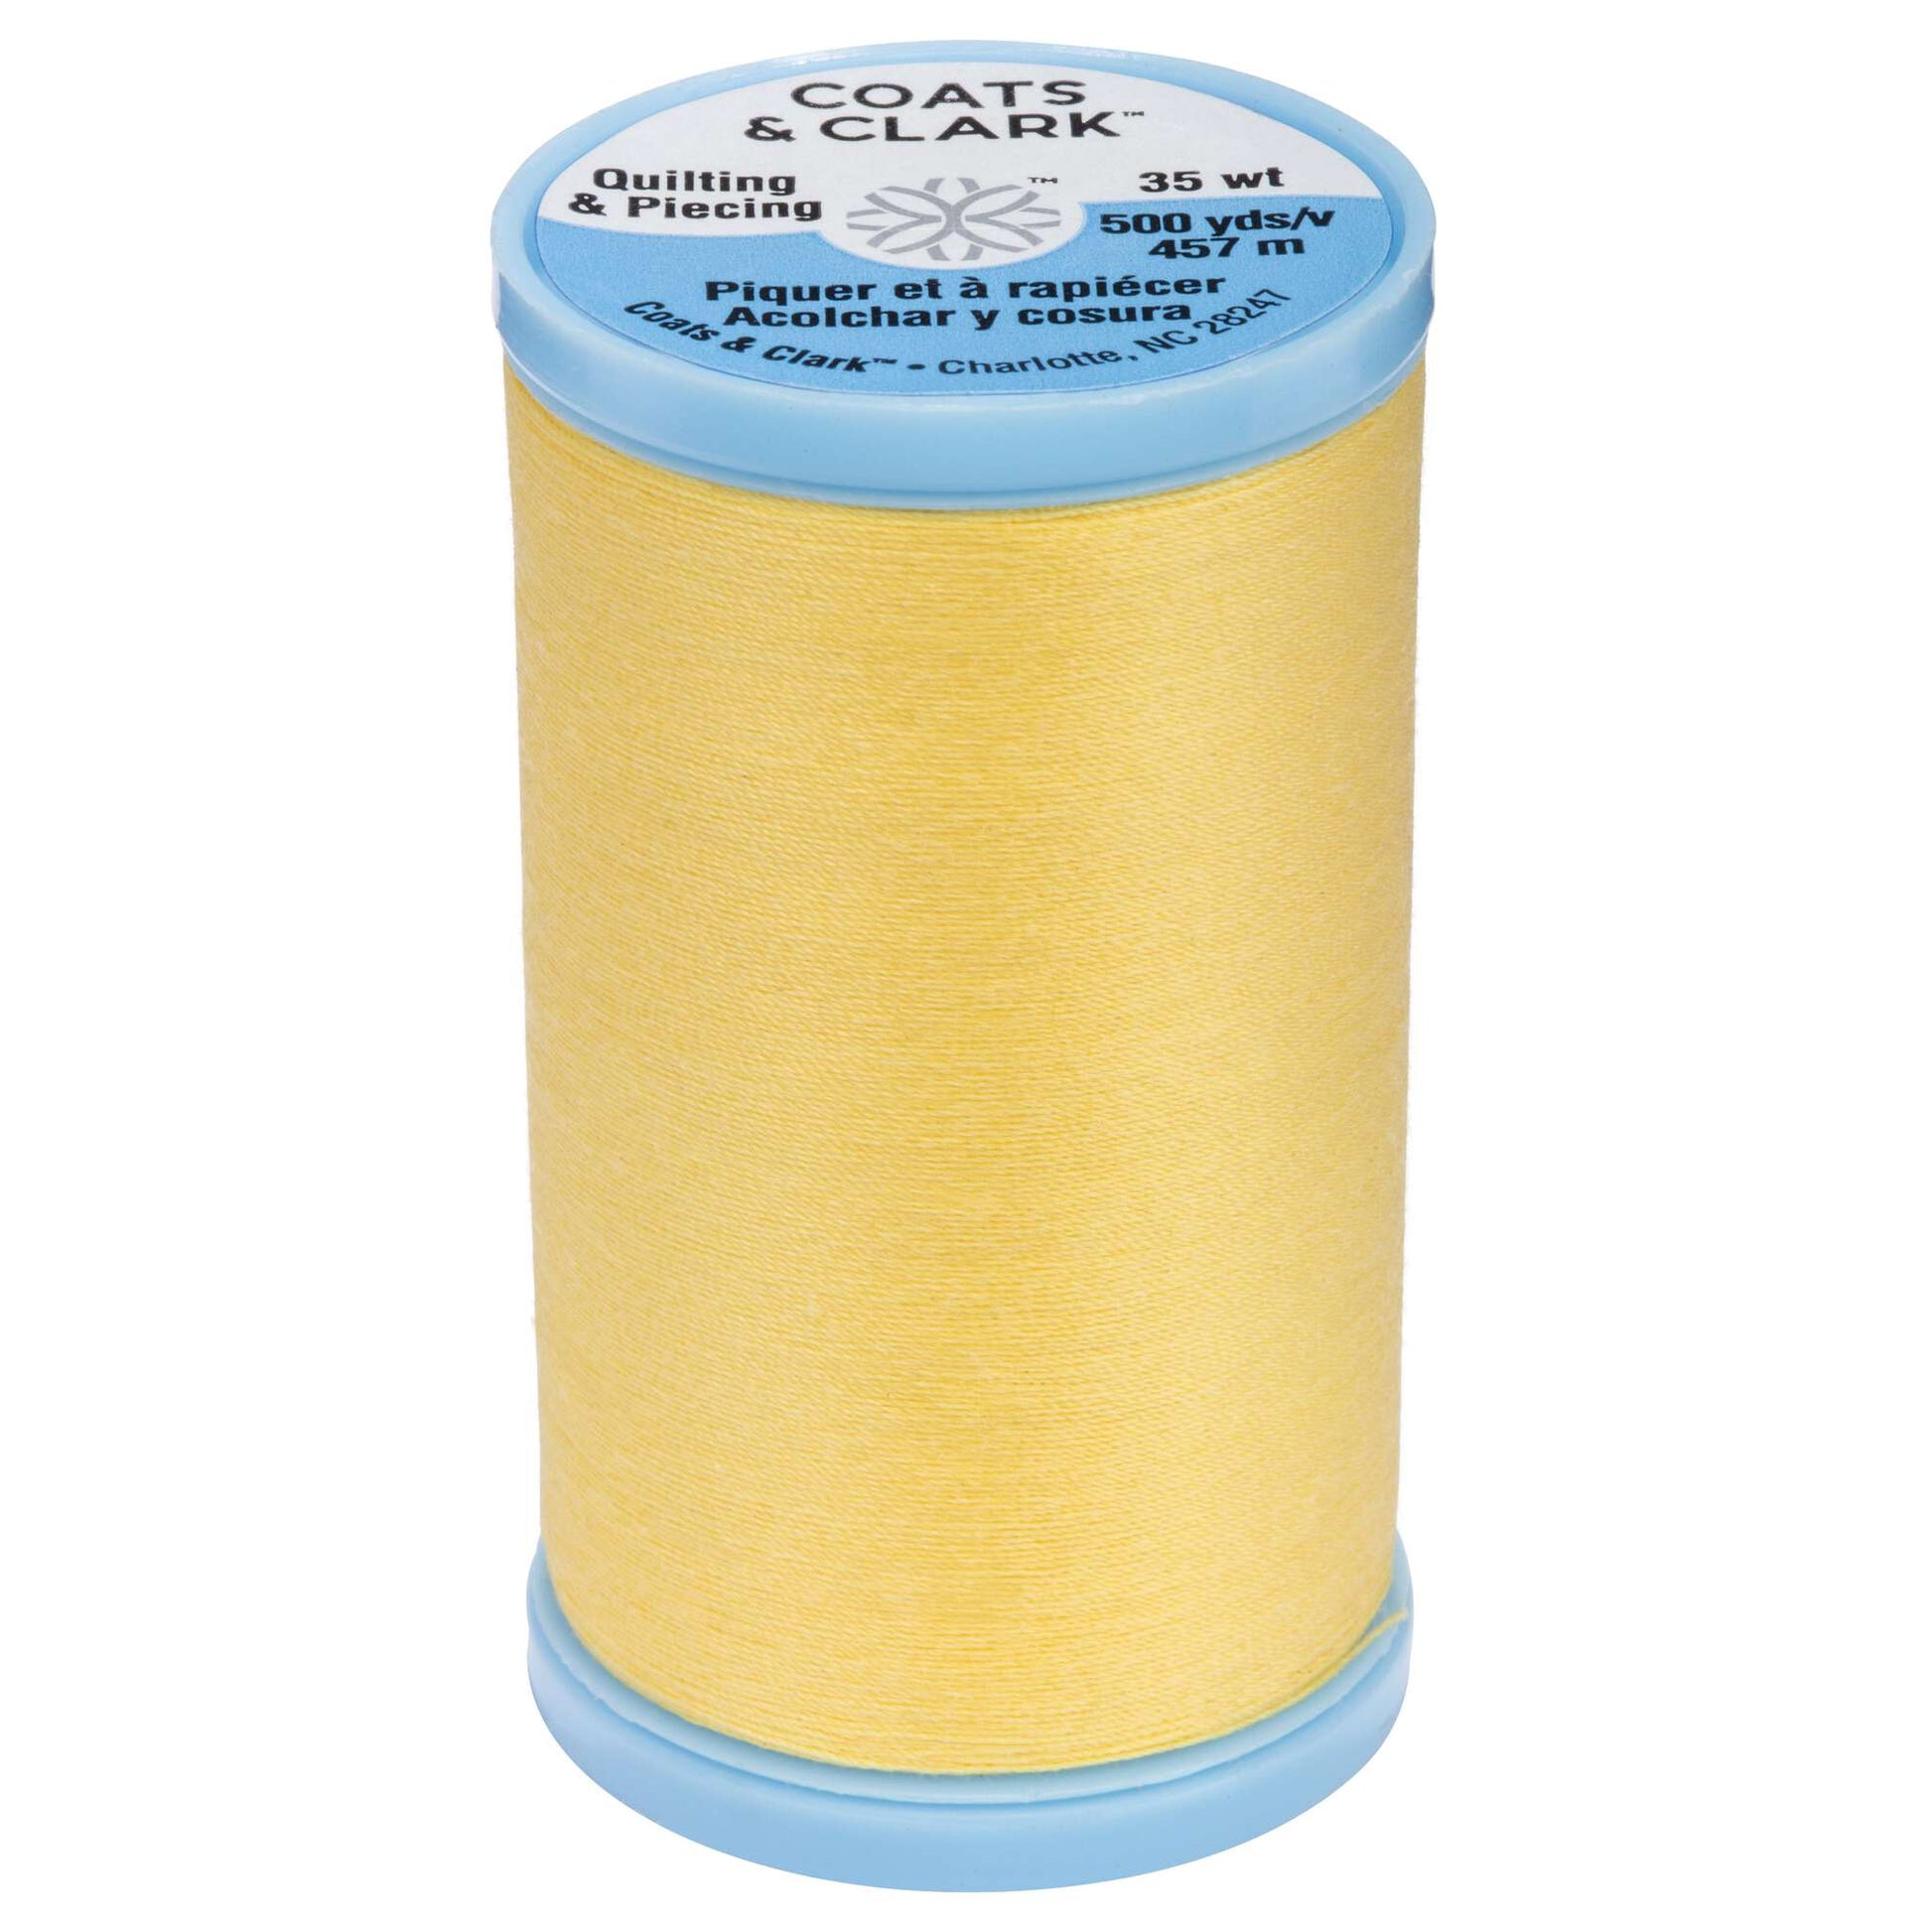 Coats & Clark Cotton Covered Quilting & Piecing Thread (500 Yards) Yellow